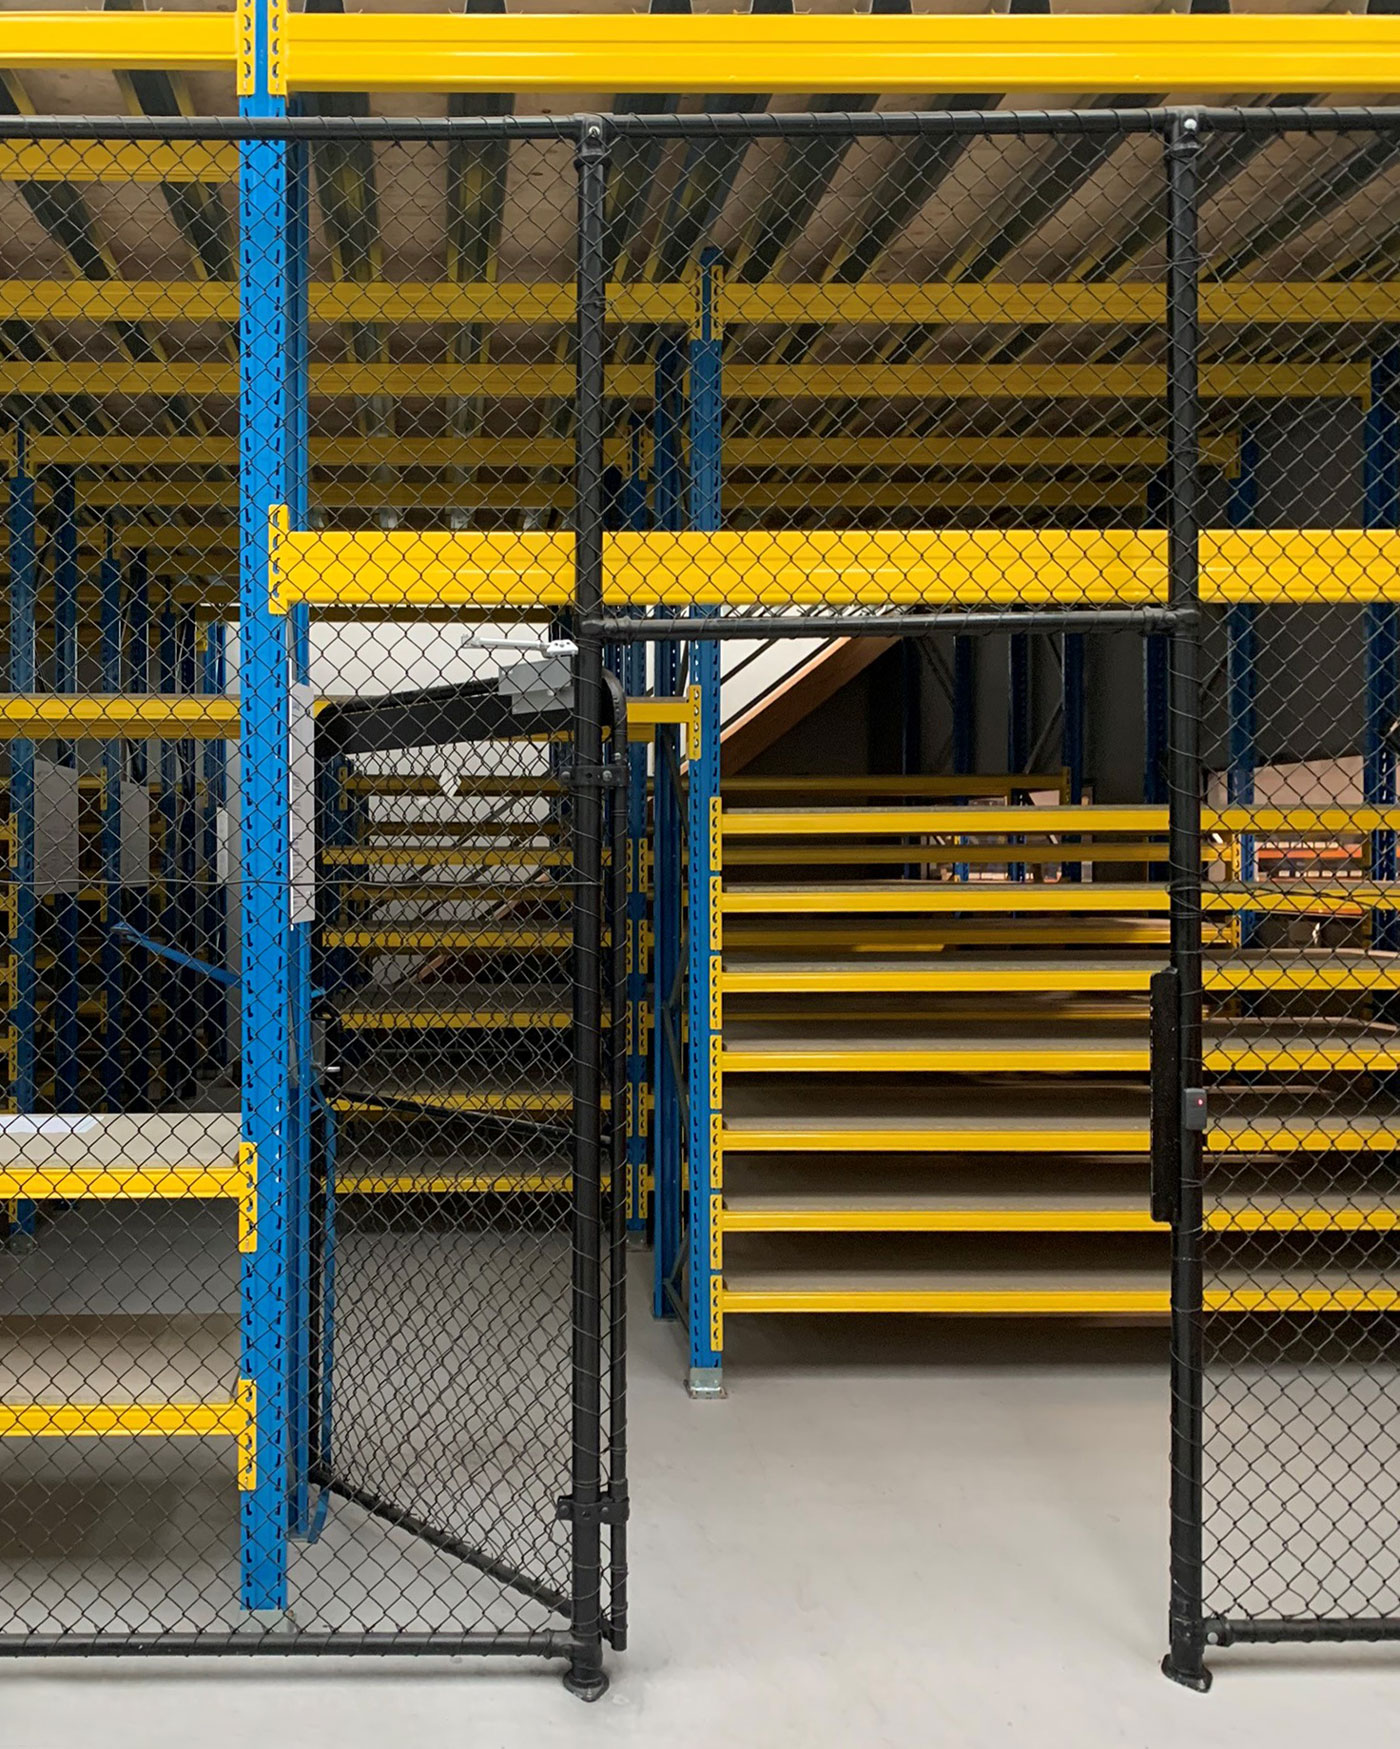 Small parts warehouse with raised storage